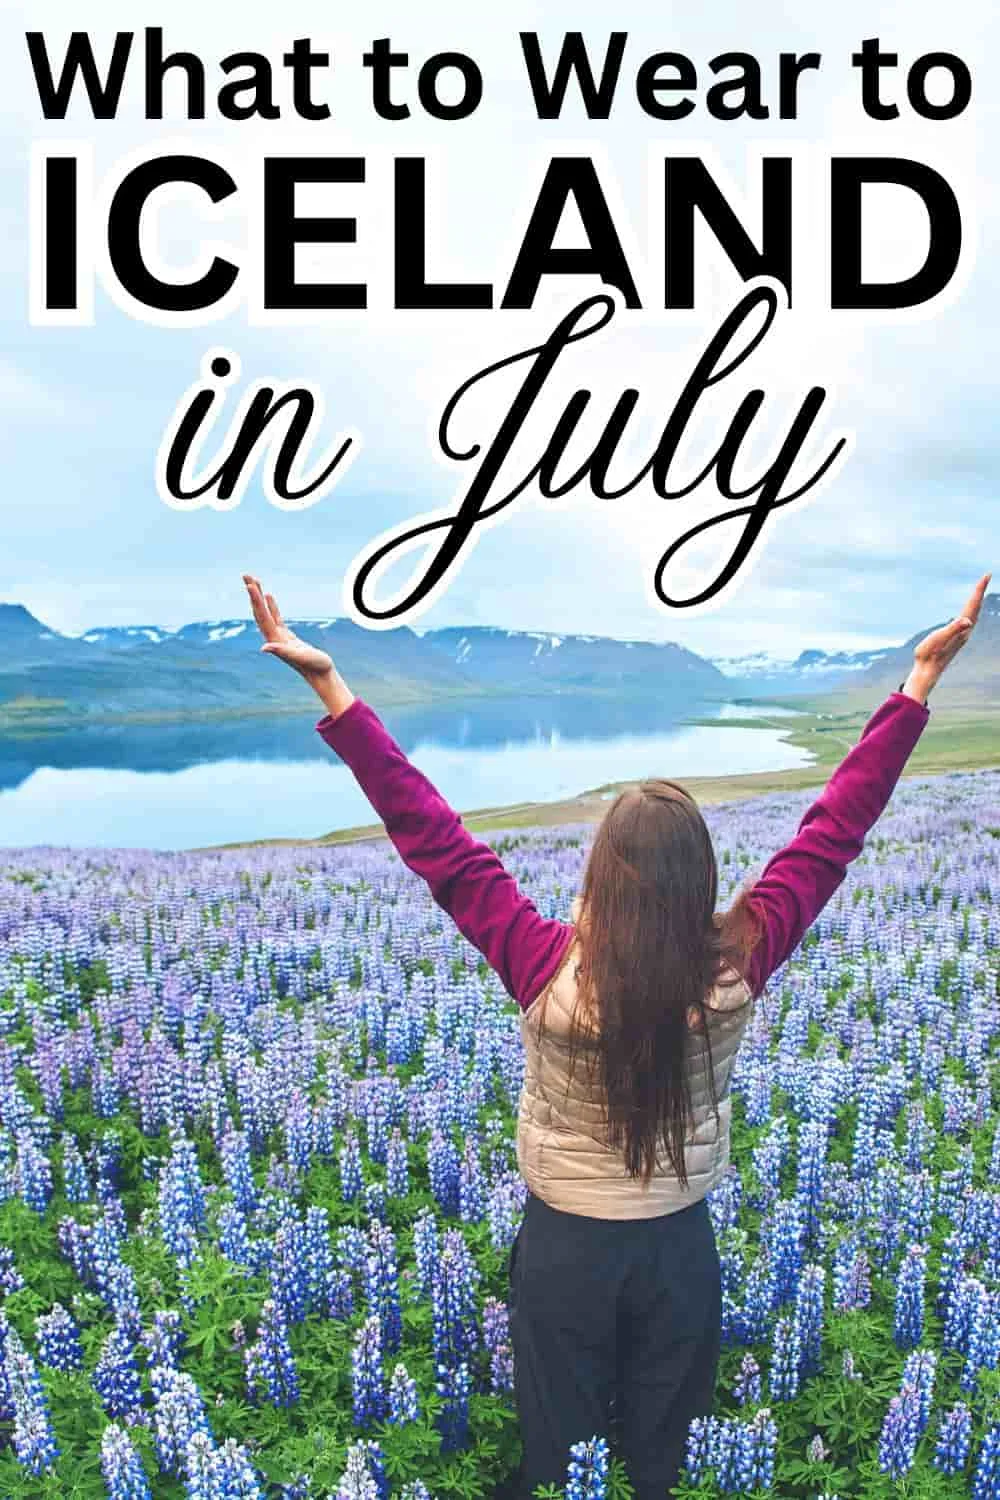 What to wear in Iceland in July